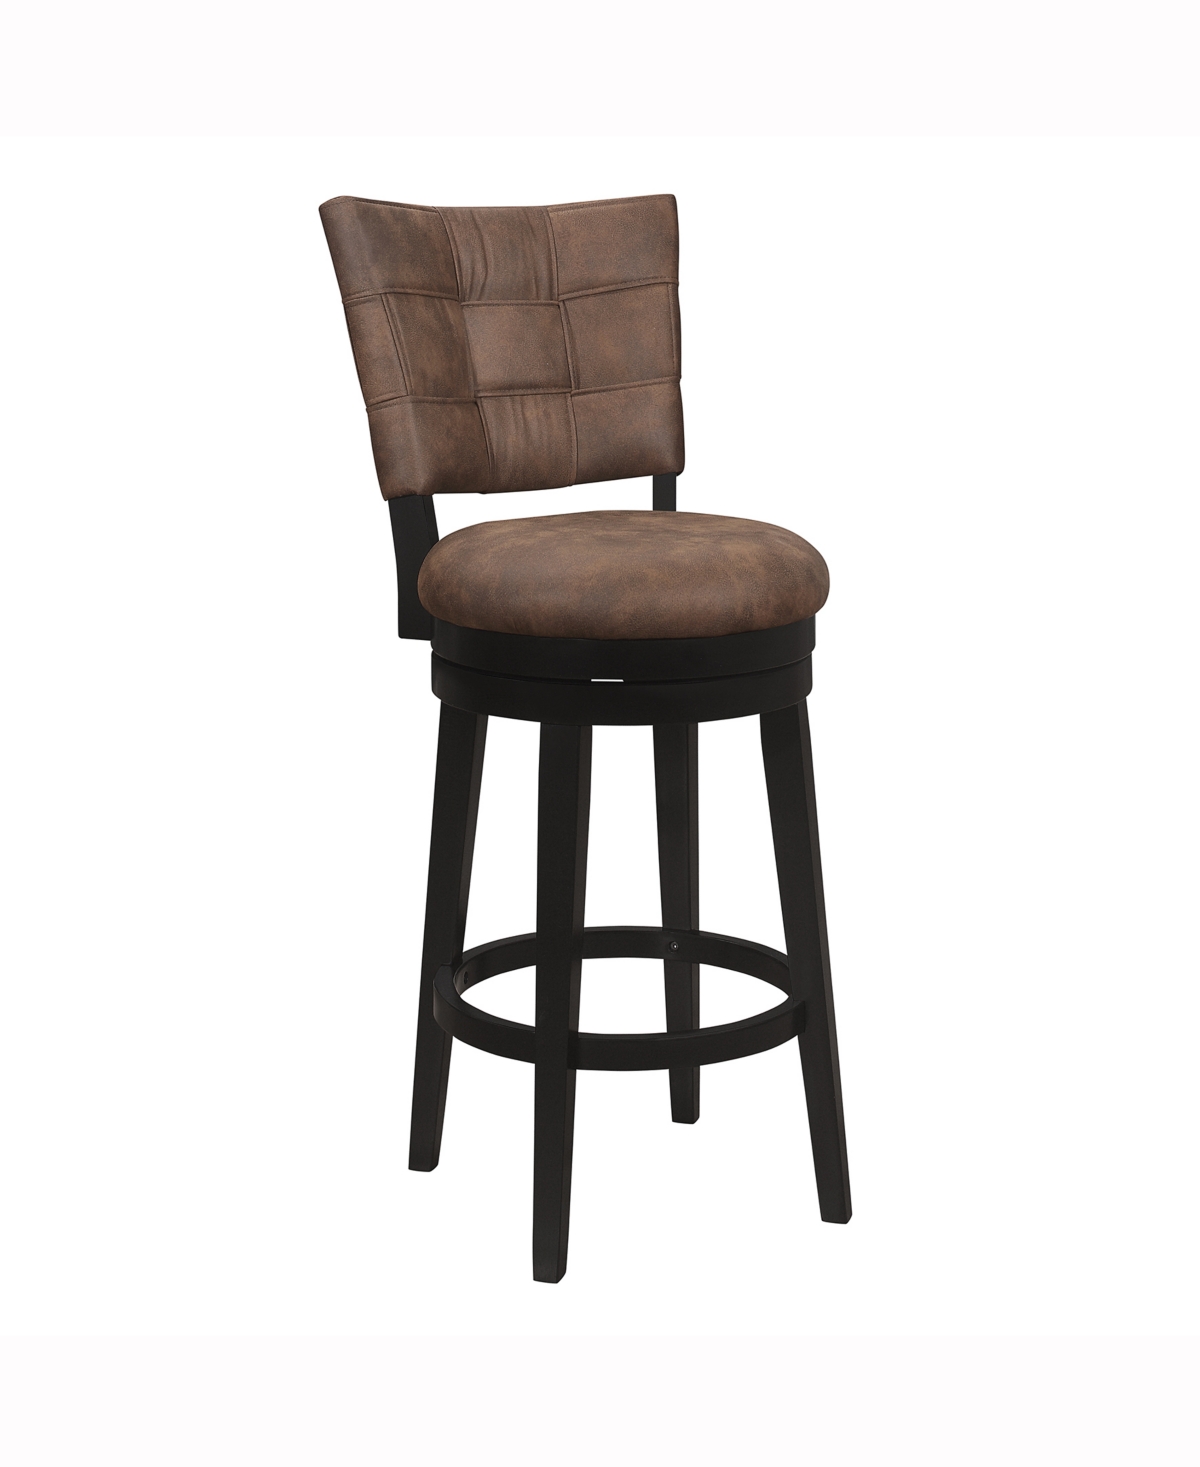 Hillsdale 45" Wood And Upholstered Kaede Furniture Bar Height Swivel Stool In Black With Chestnut Faux Leather